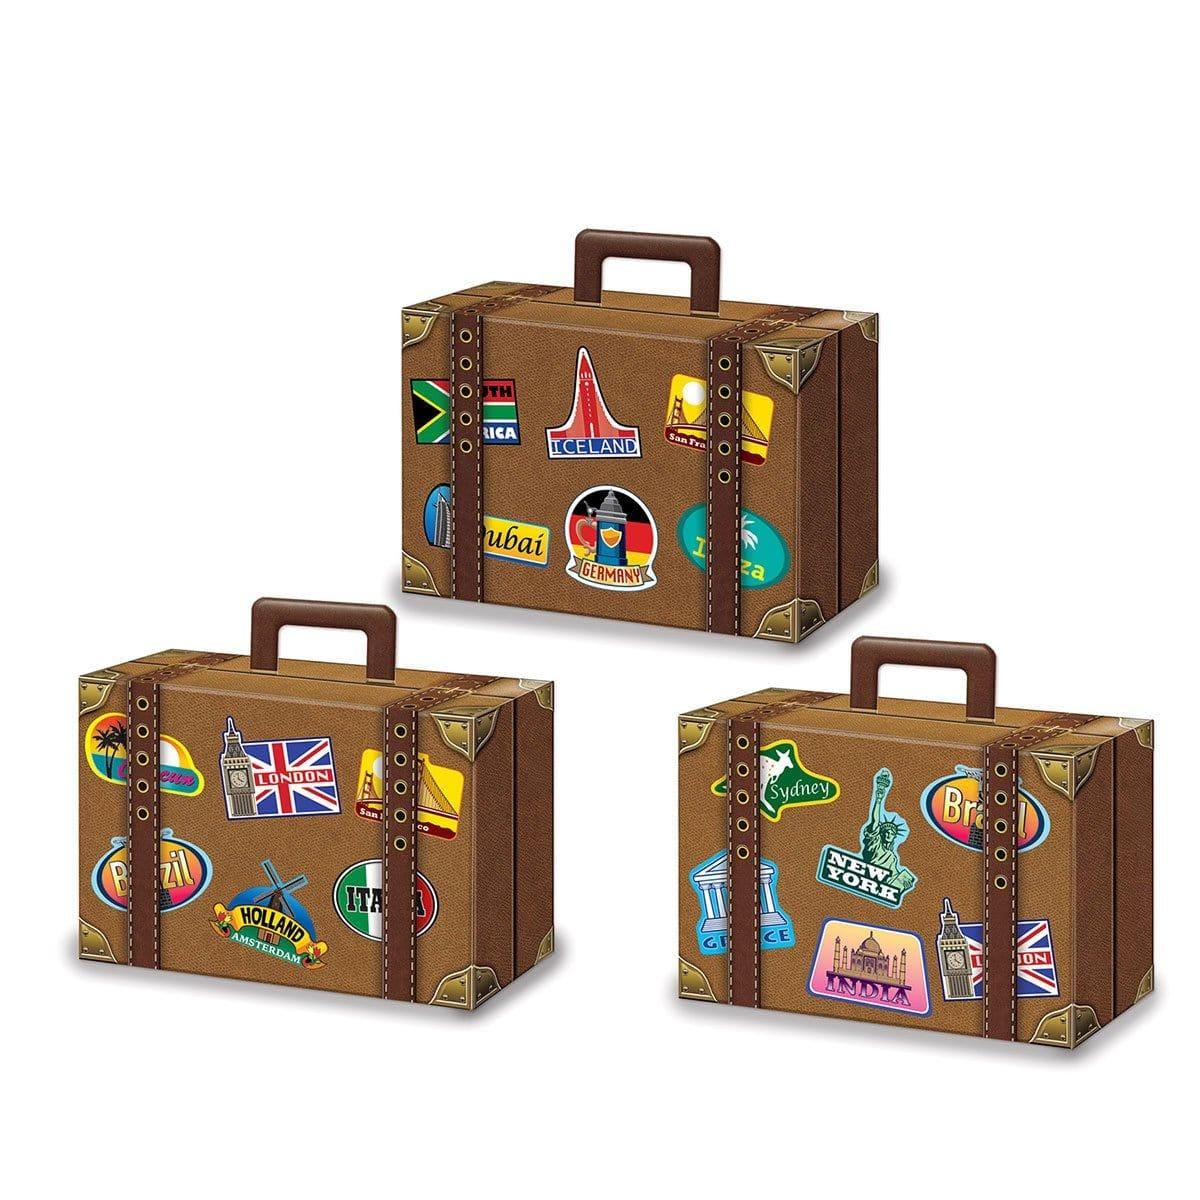 Buy Theme Party Luggage Favor Boxes, 3 per Package sold at Party Expert